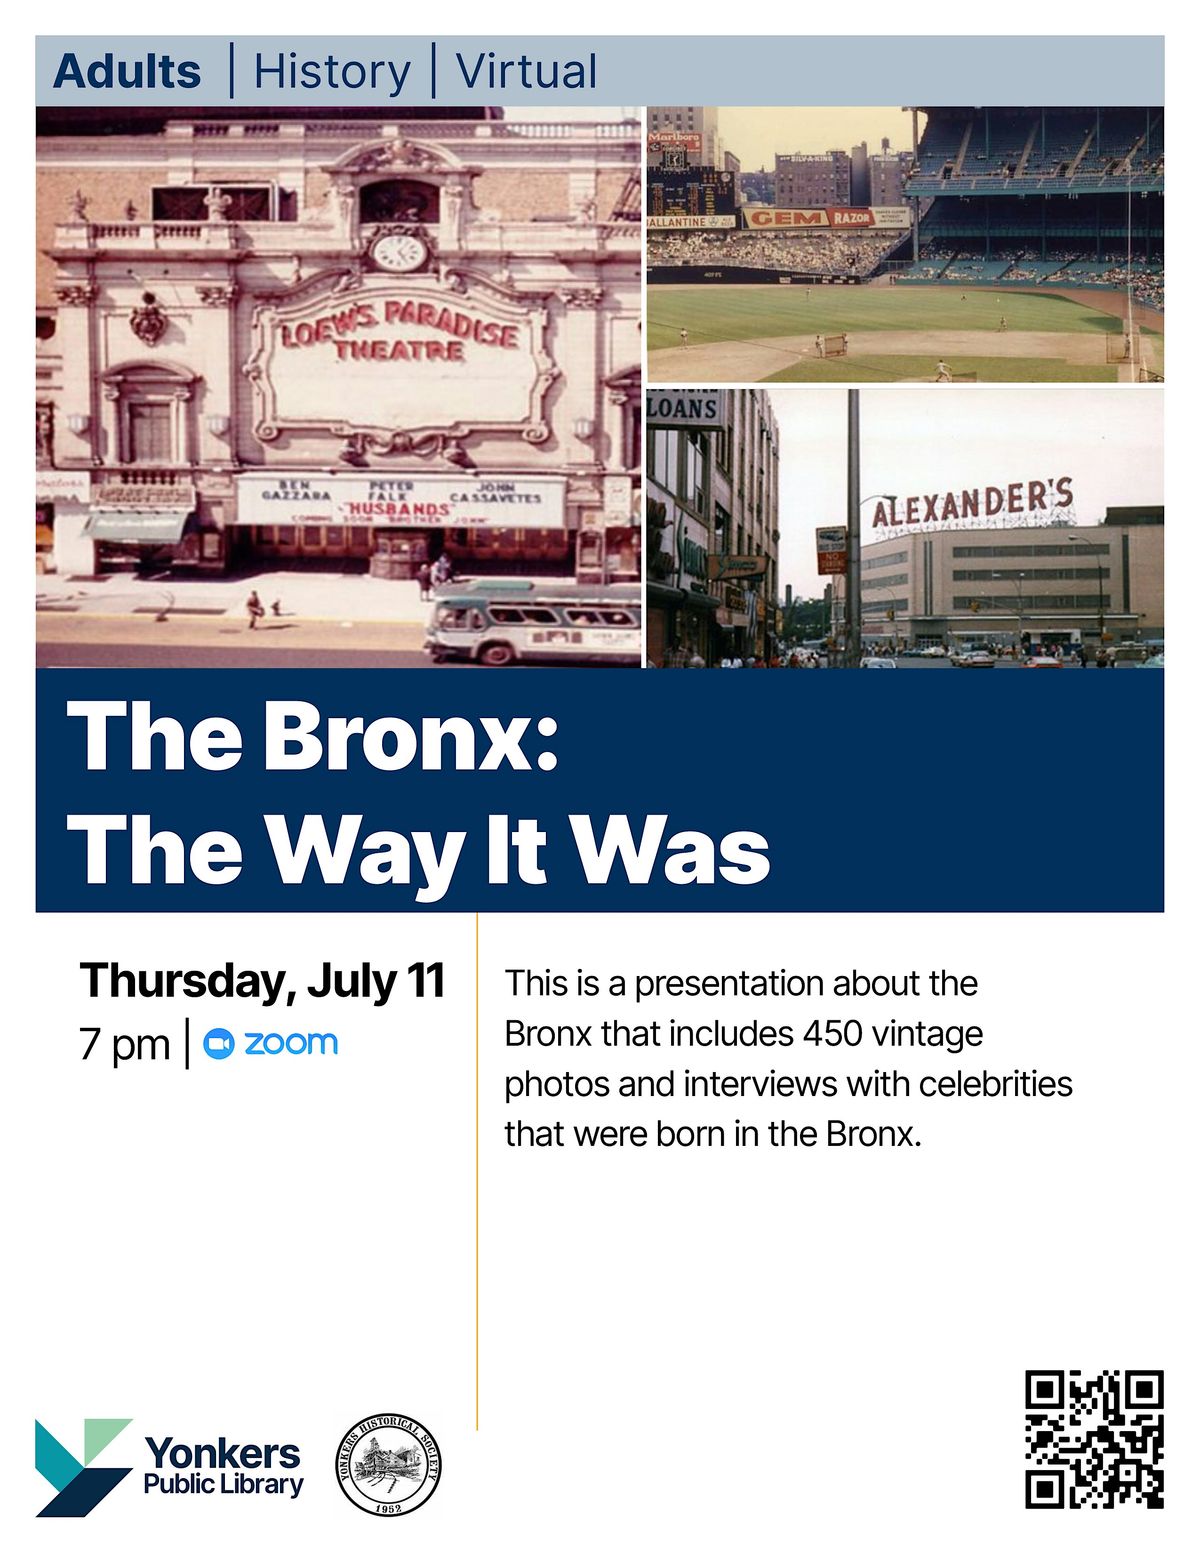 The Bronx: The Way It Was